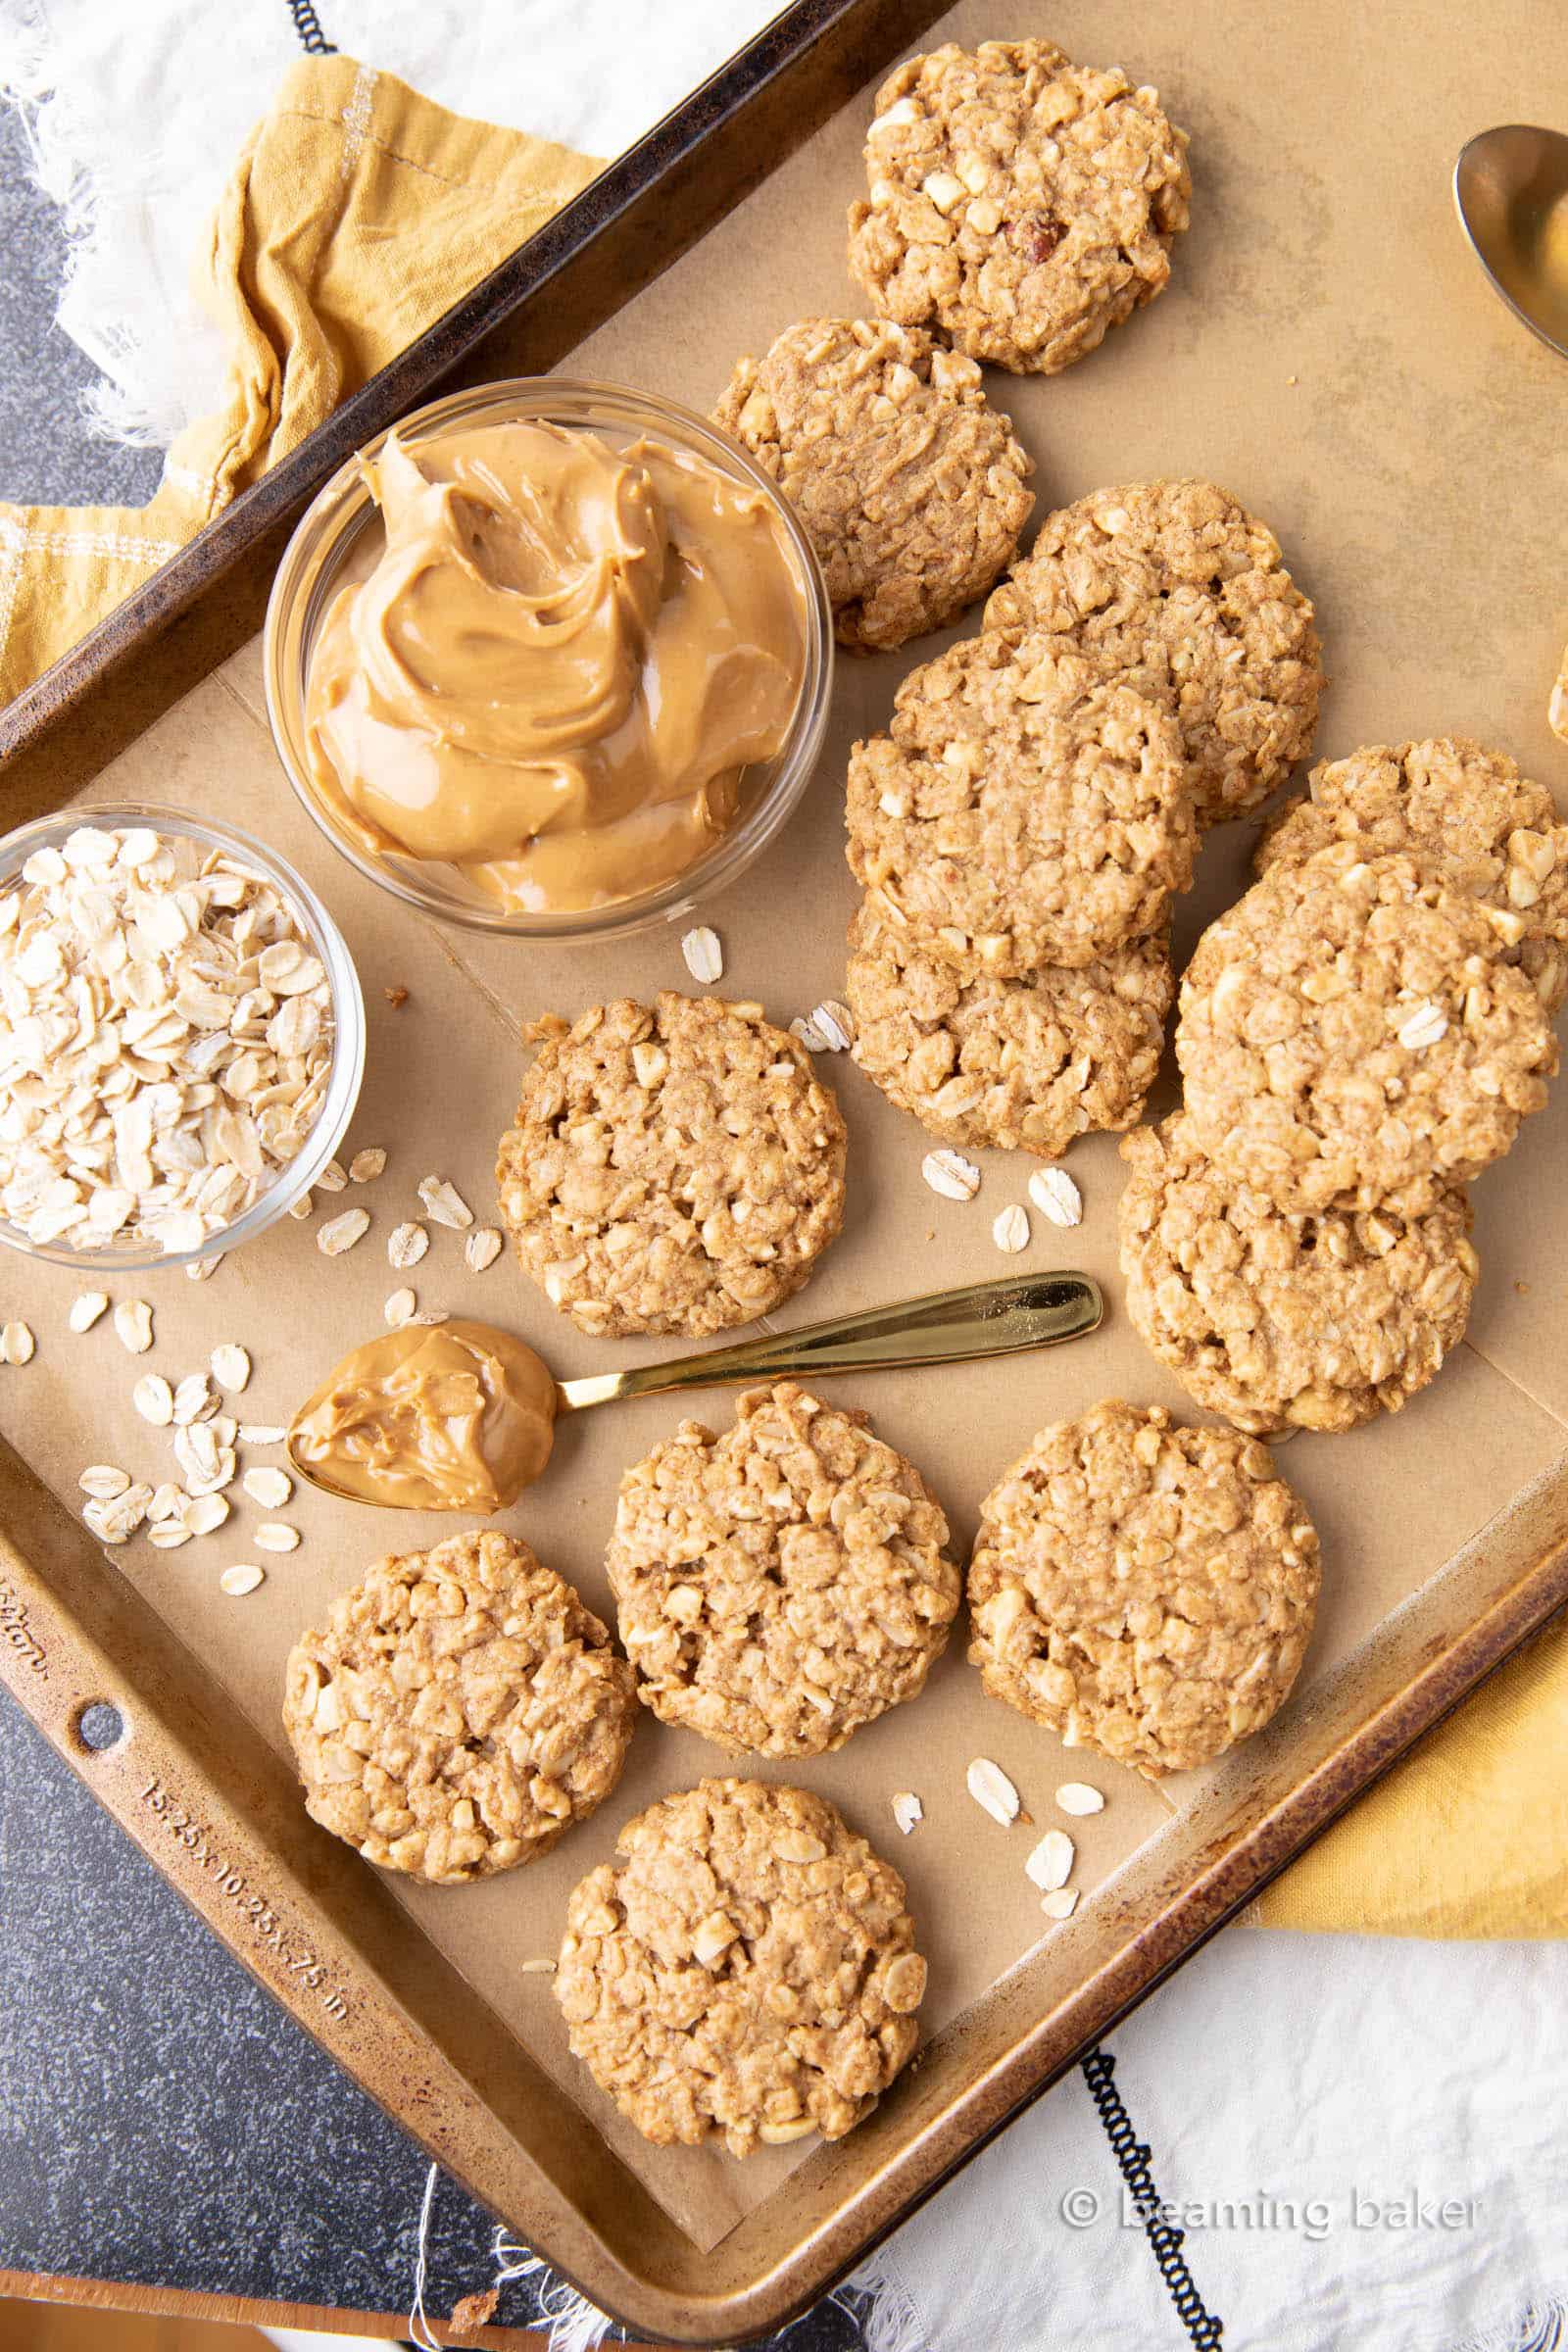 Healthy Peanut Butter Oatmeal Cookies: an easy recipe for healthy peanut butter oatmeal cookies made with simple, whole ingredients. #Healthy #Cookies #PeanutButter #Oatmeal | Recipe at BeamingBaker.com